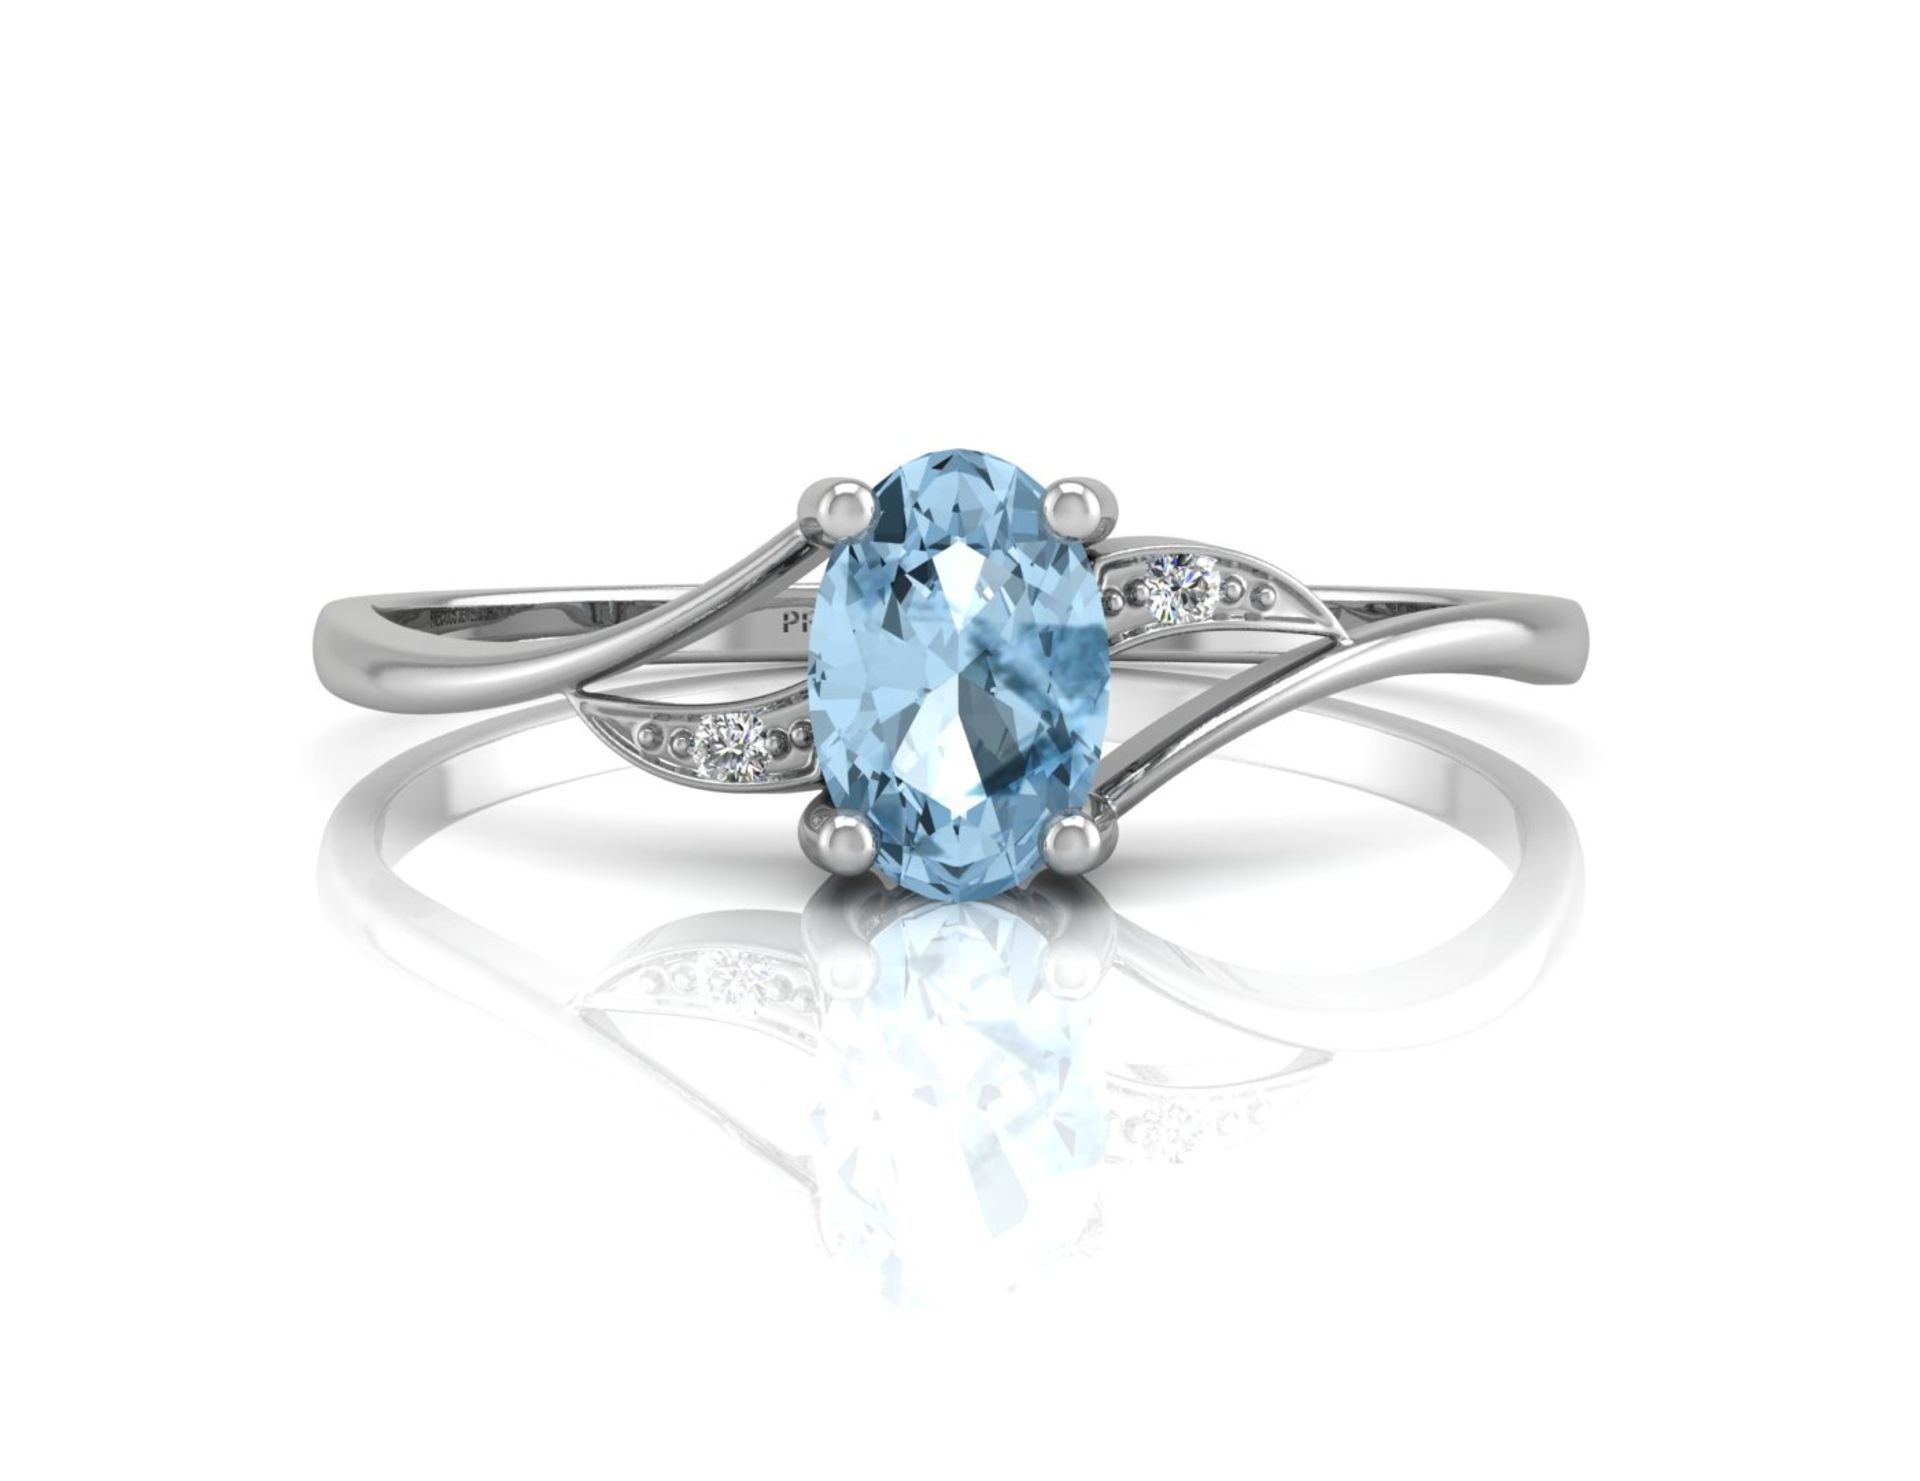 ***£745.00*** UNUSED - Certified by GIE 9ct White Gold Diamond And Blue Topaz Ring 0.01 Carats, - Image 4 of 5